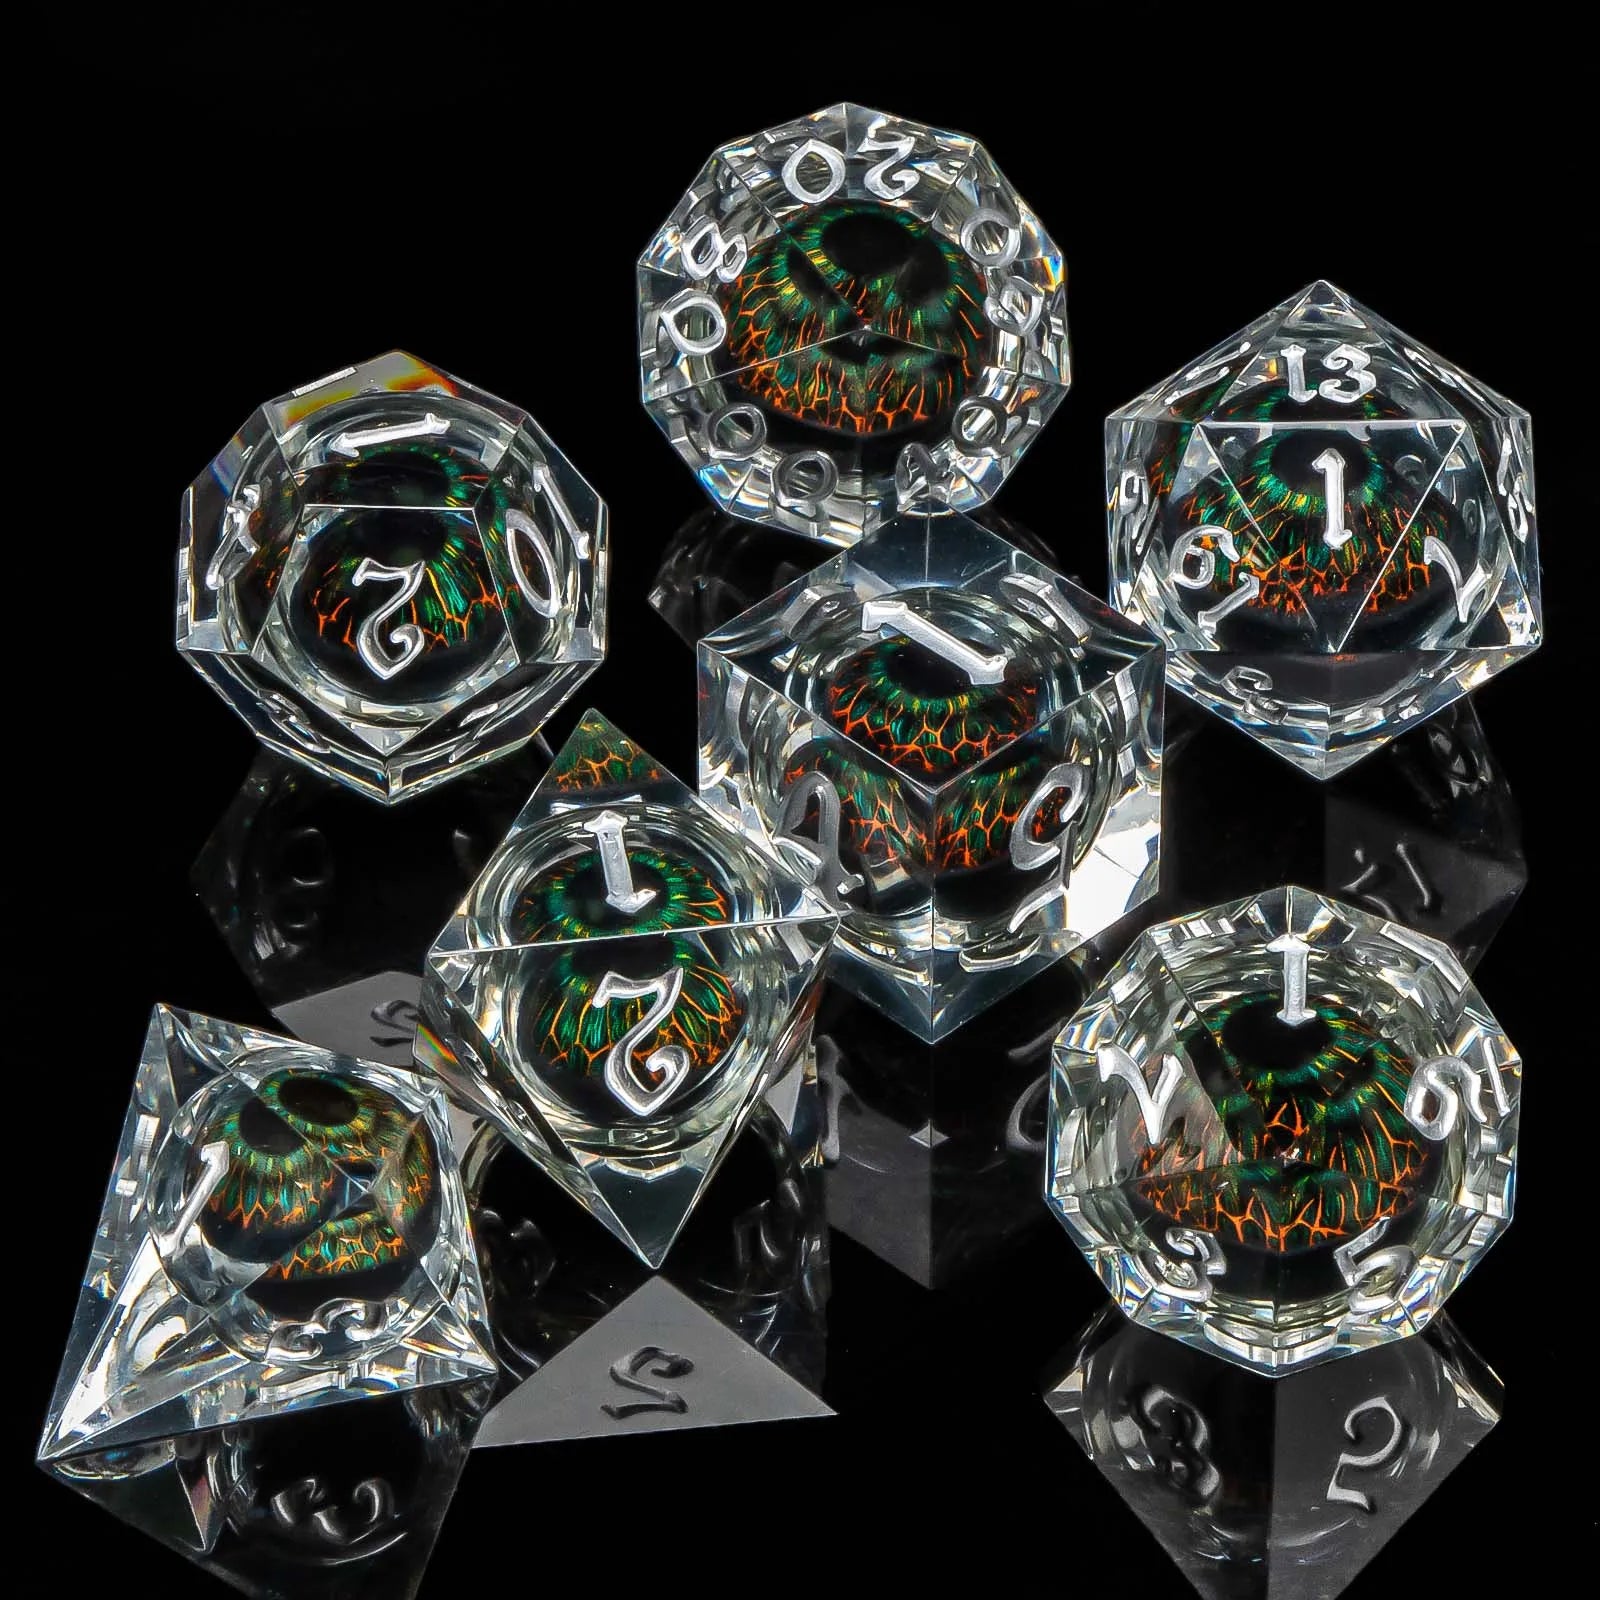 D and D Flowing Sand Sharp Edge Dragon Eye Dnd Resin RPG Polyhedral D&D Dice Set For Dungeon and Dragon Pathfinder Role Playing AZ01